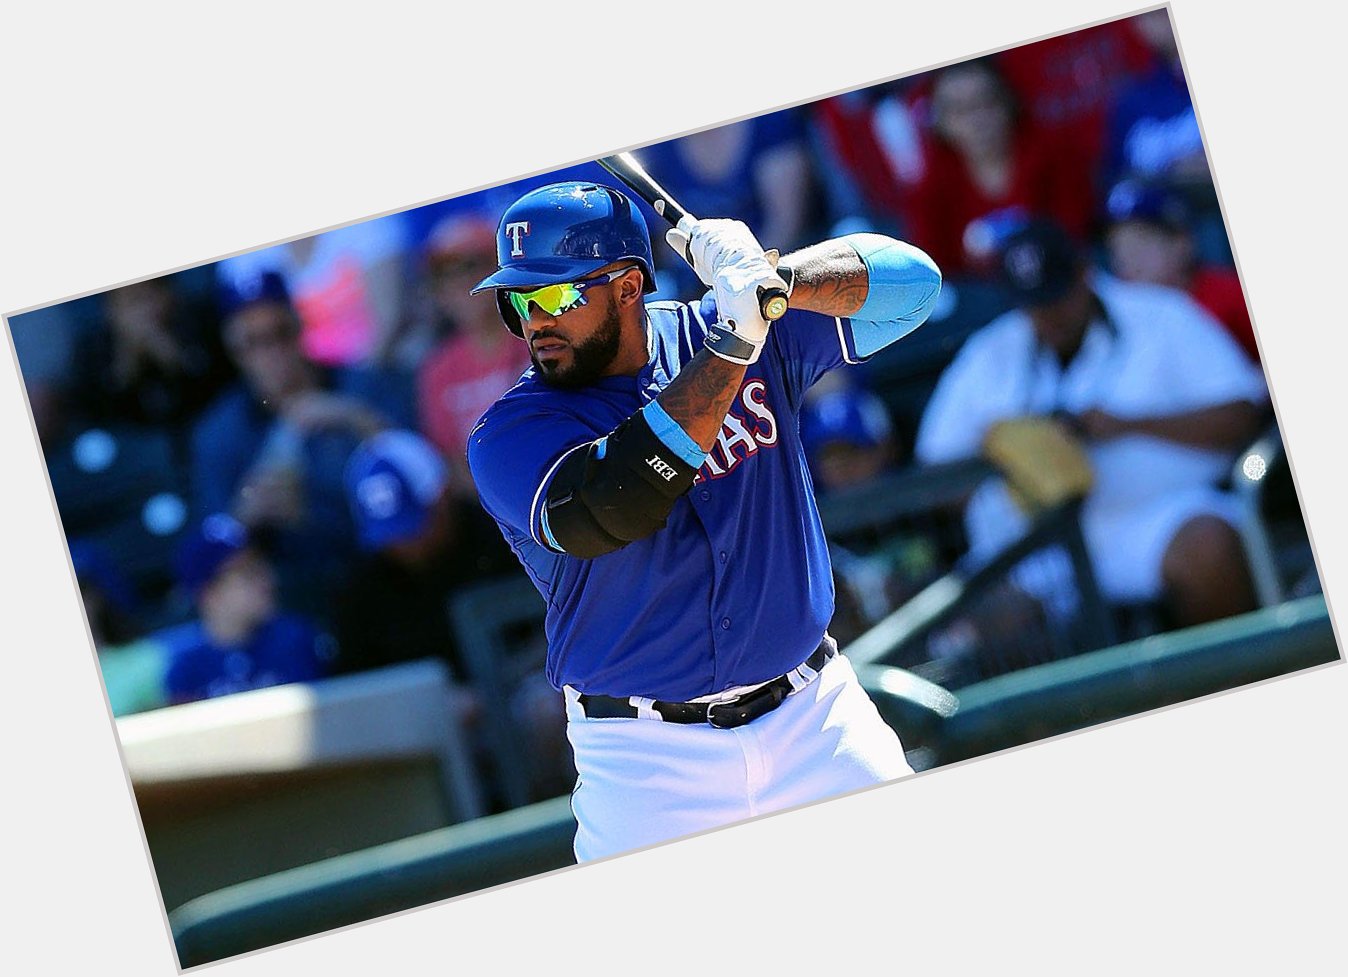 Happy Birthday to Prince Fielder, who turns 33 today! 